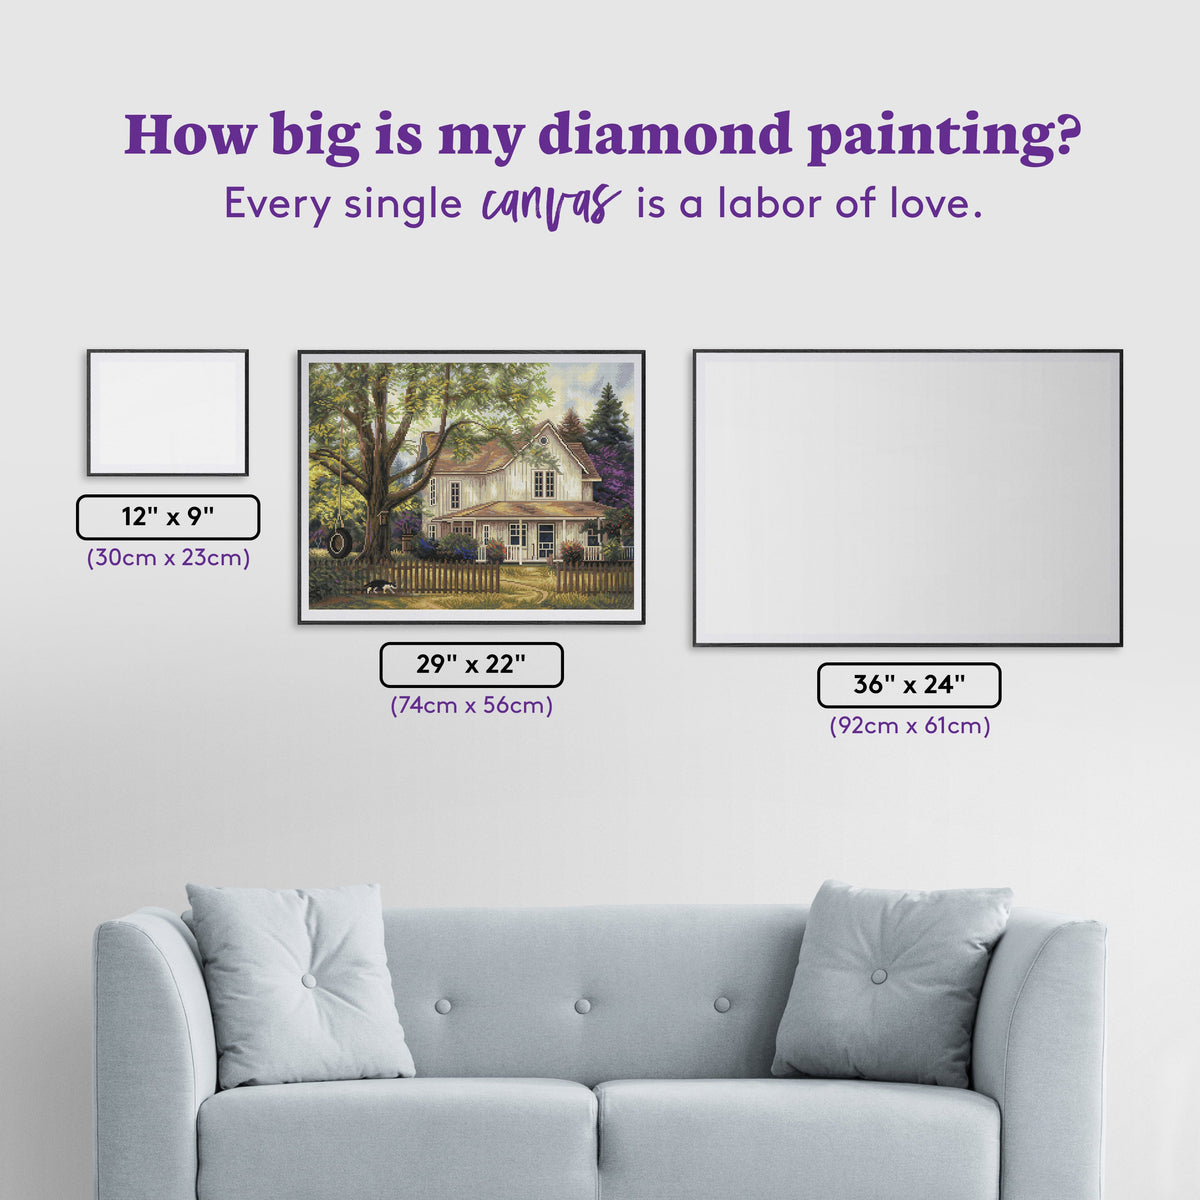 Diamond Painting Simple Country 29" x 22″ （74cm x 56cm) / Round with 43 Colors including 2 ABs / 51,678